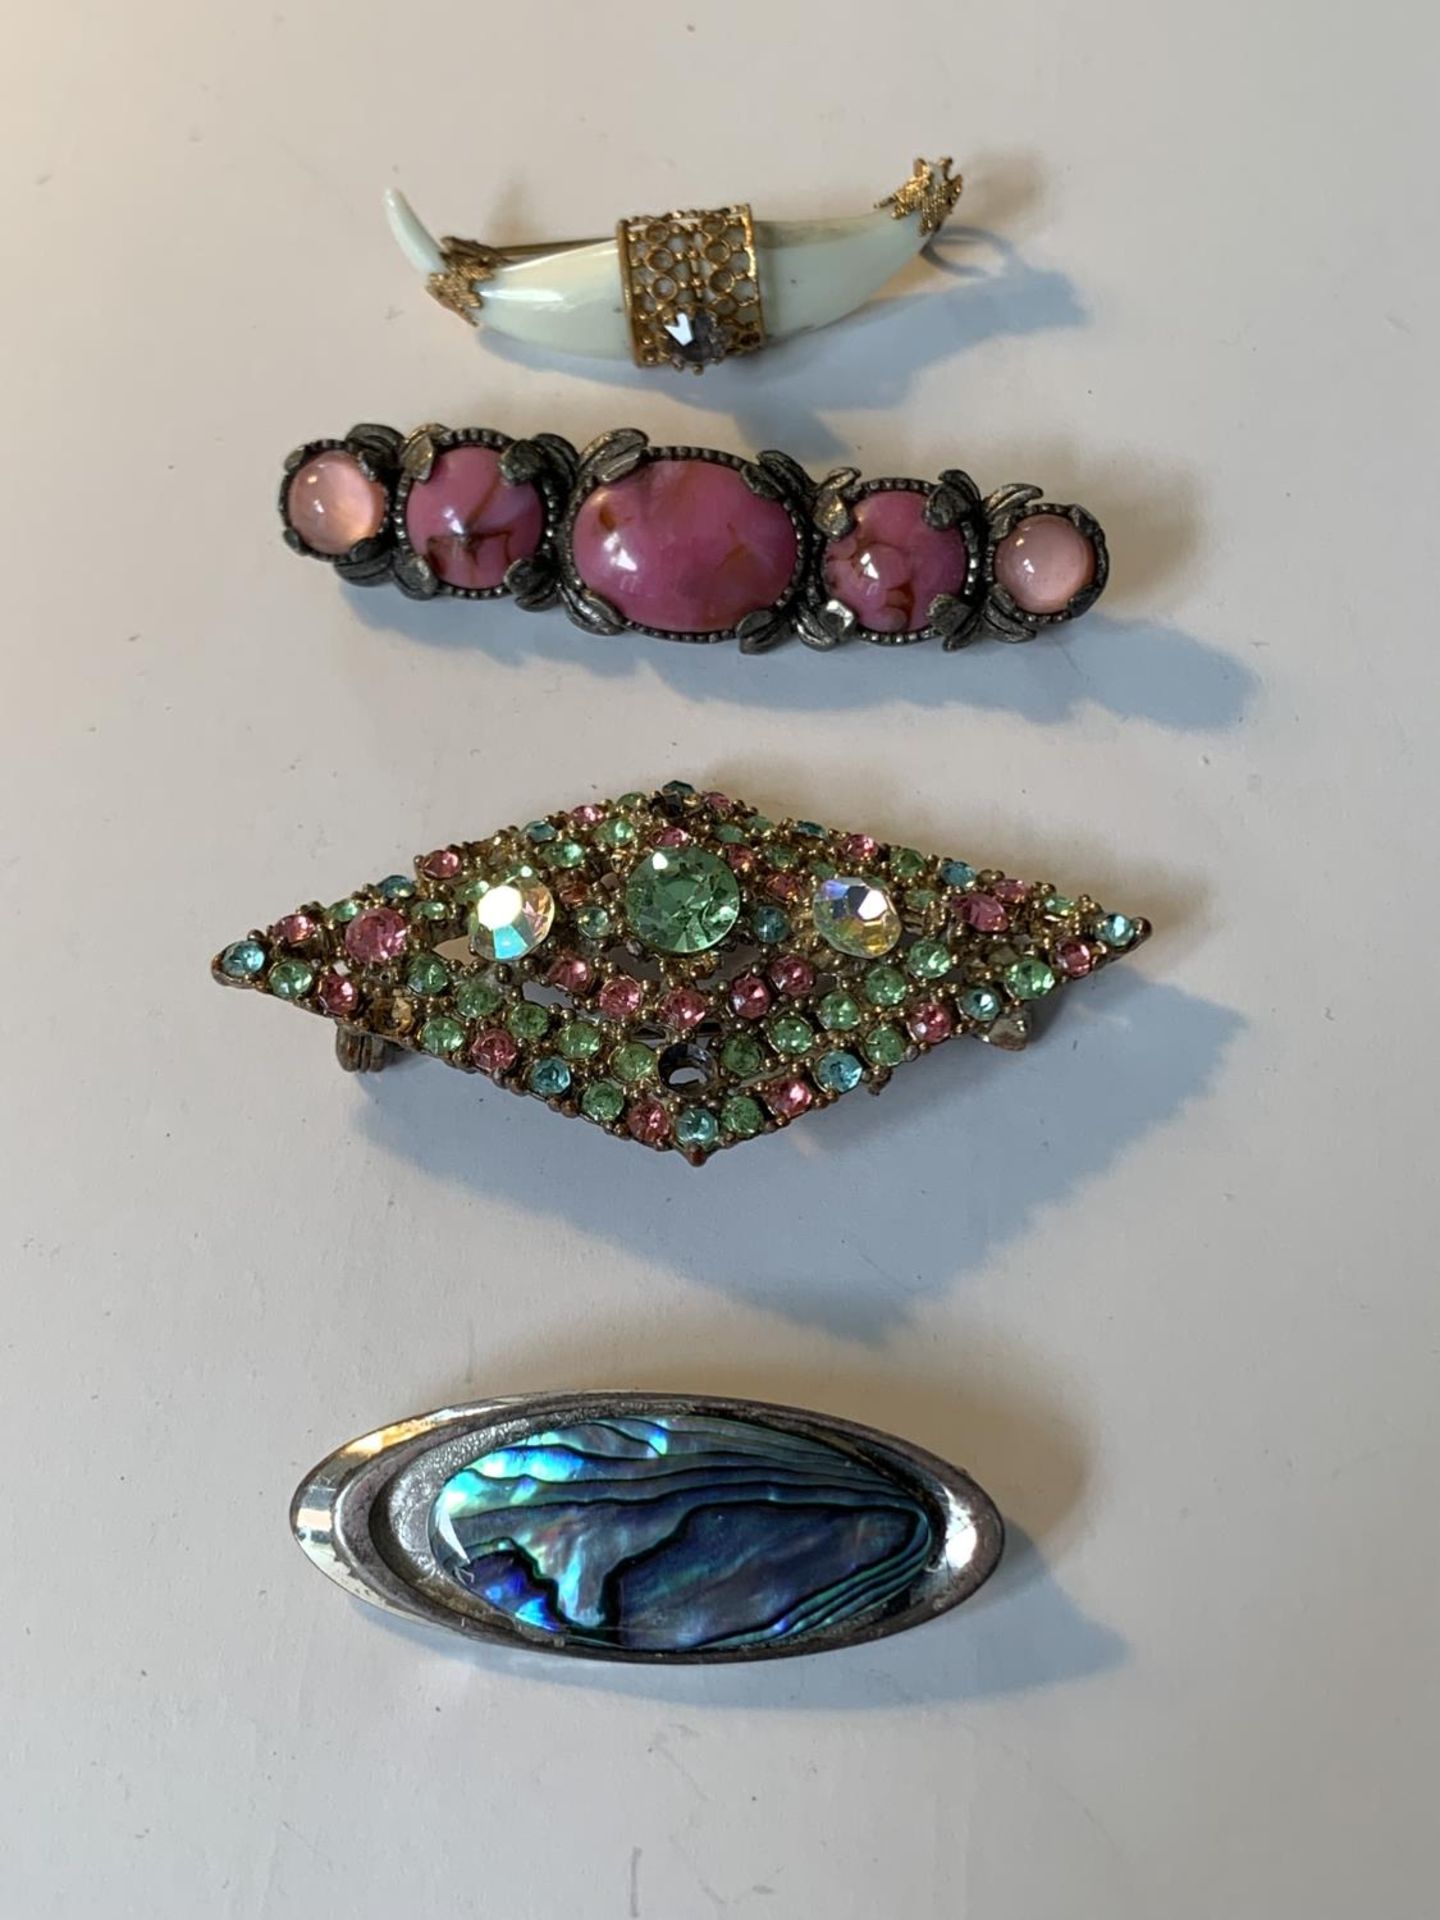 FOUR VARIOUS BROOCHES